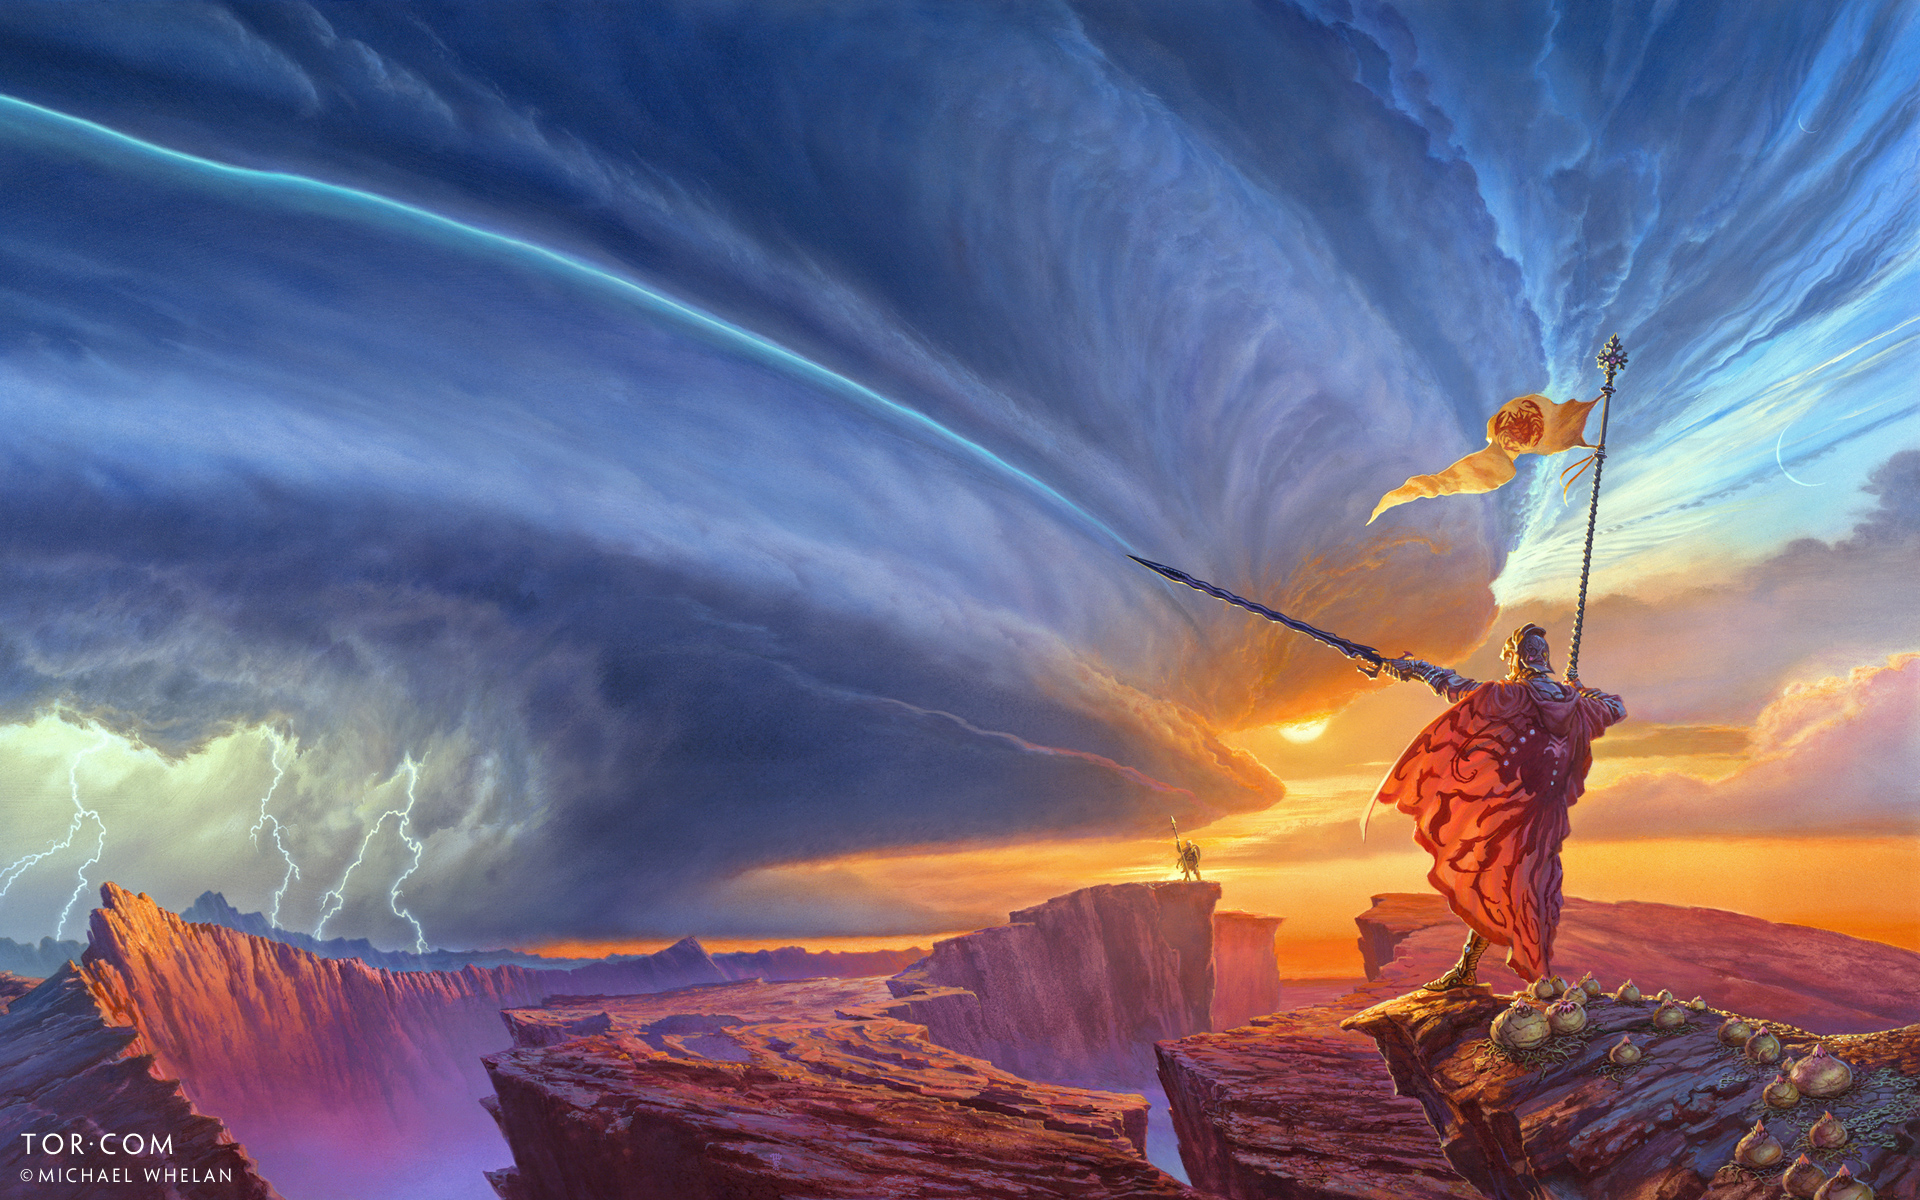 Download wallpapers for brandon sandersons the way of kings illustrated by artist michael whelan